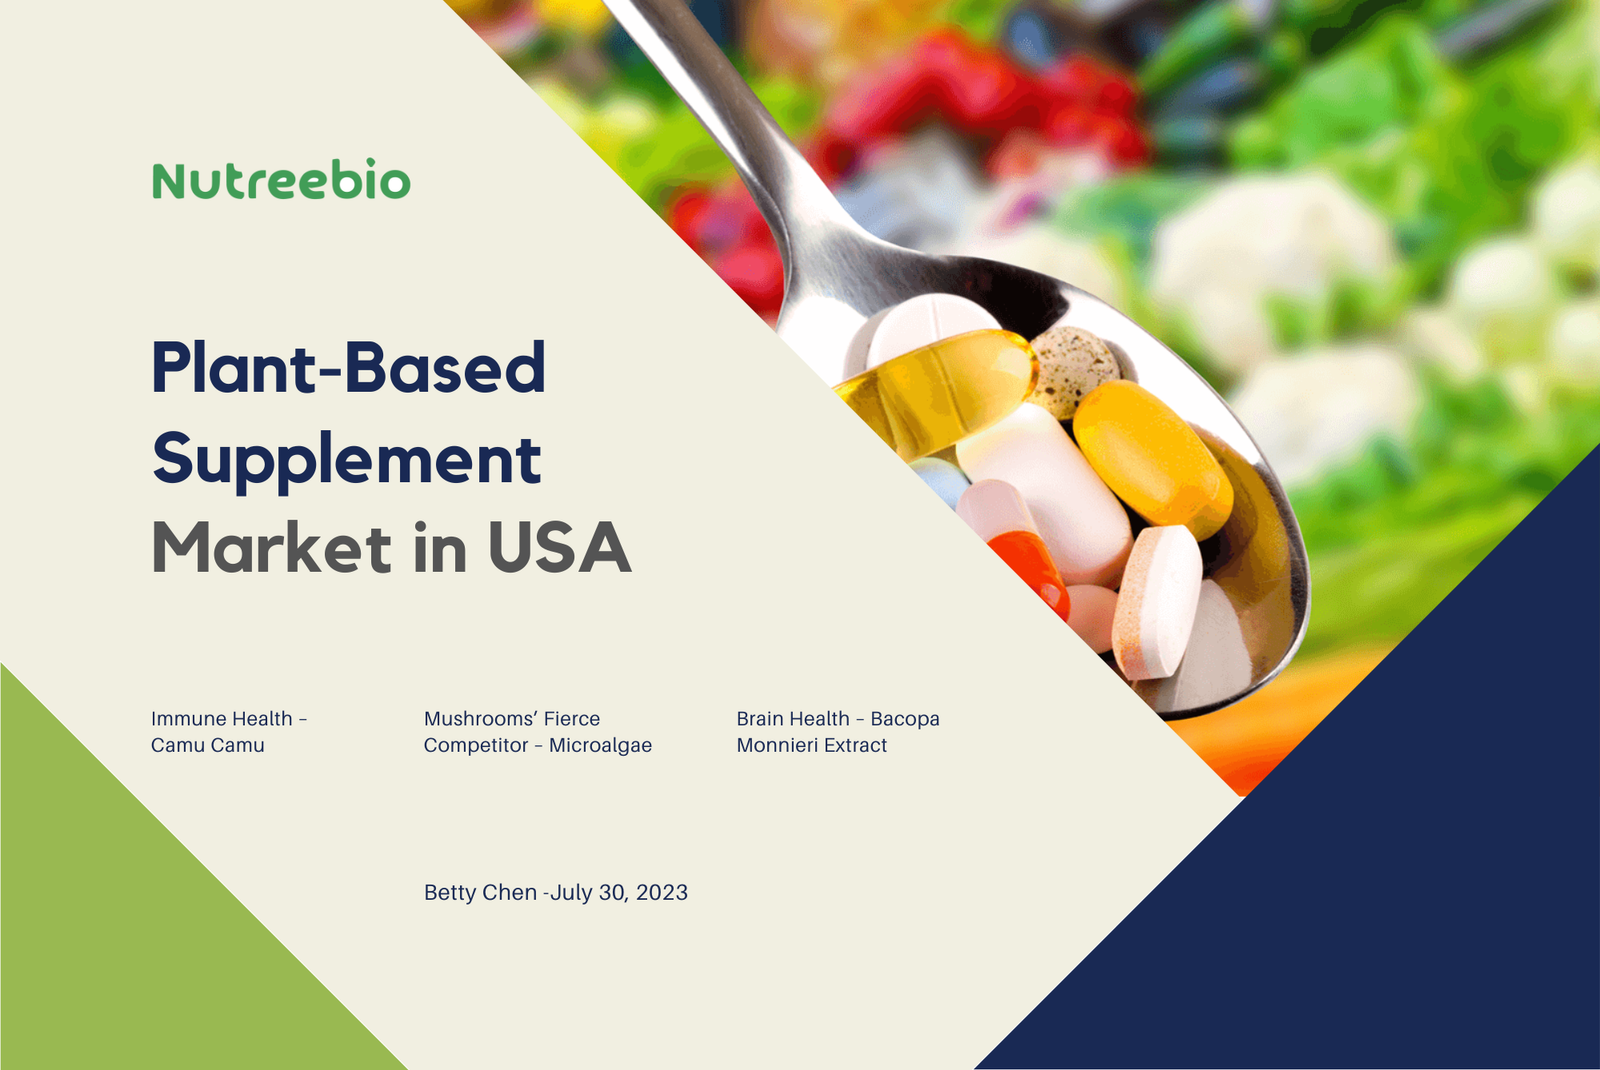 Analysis of the Latest Plant-Based Supplement Market in the United States